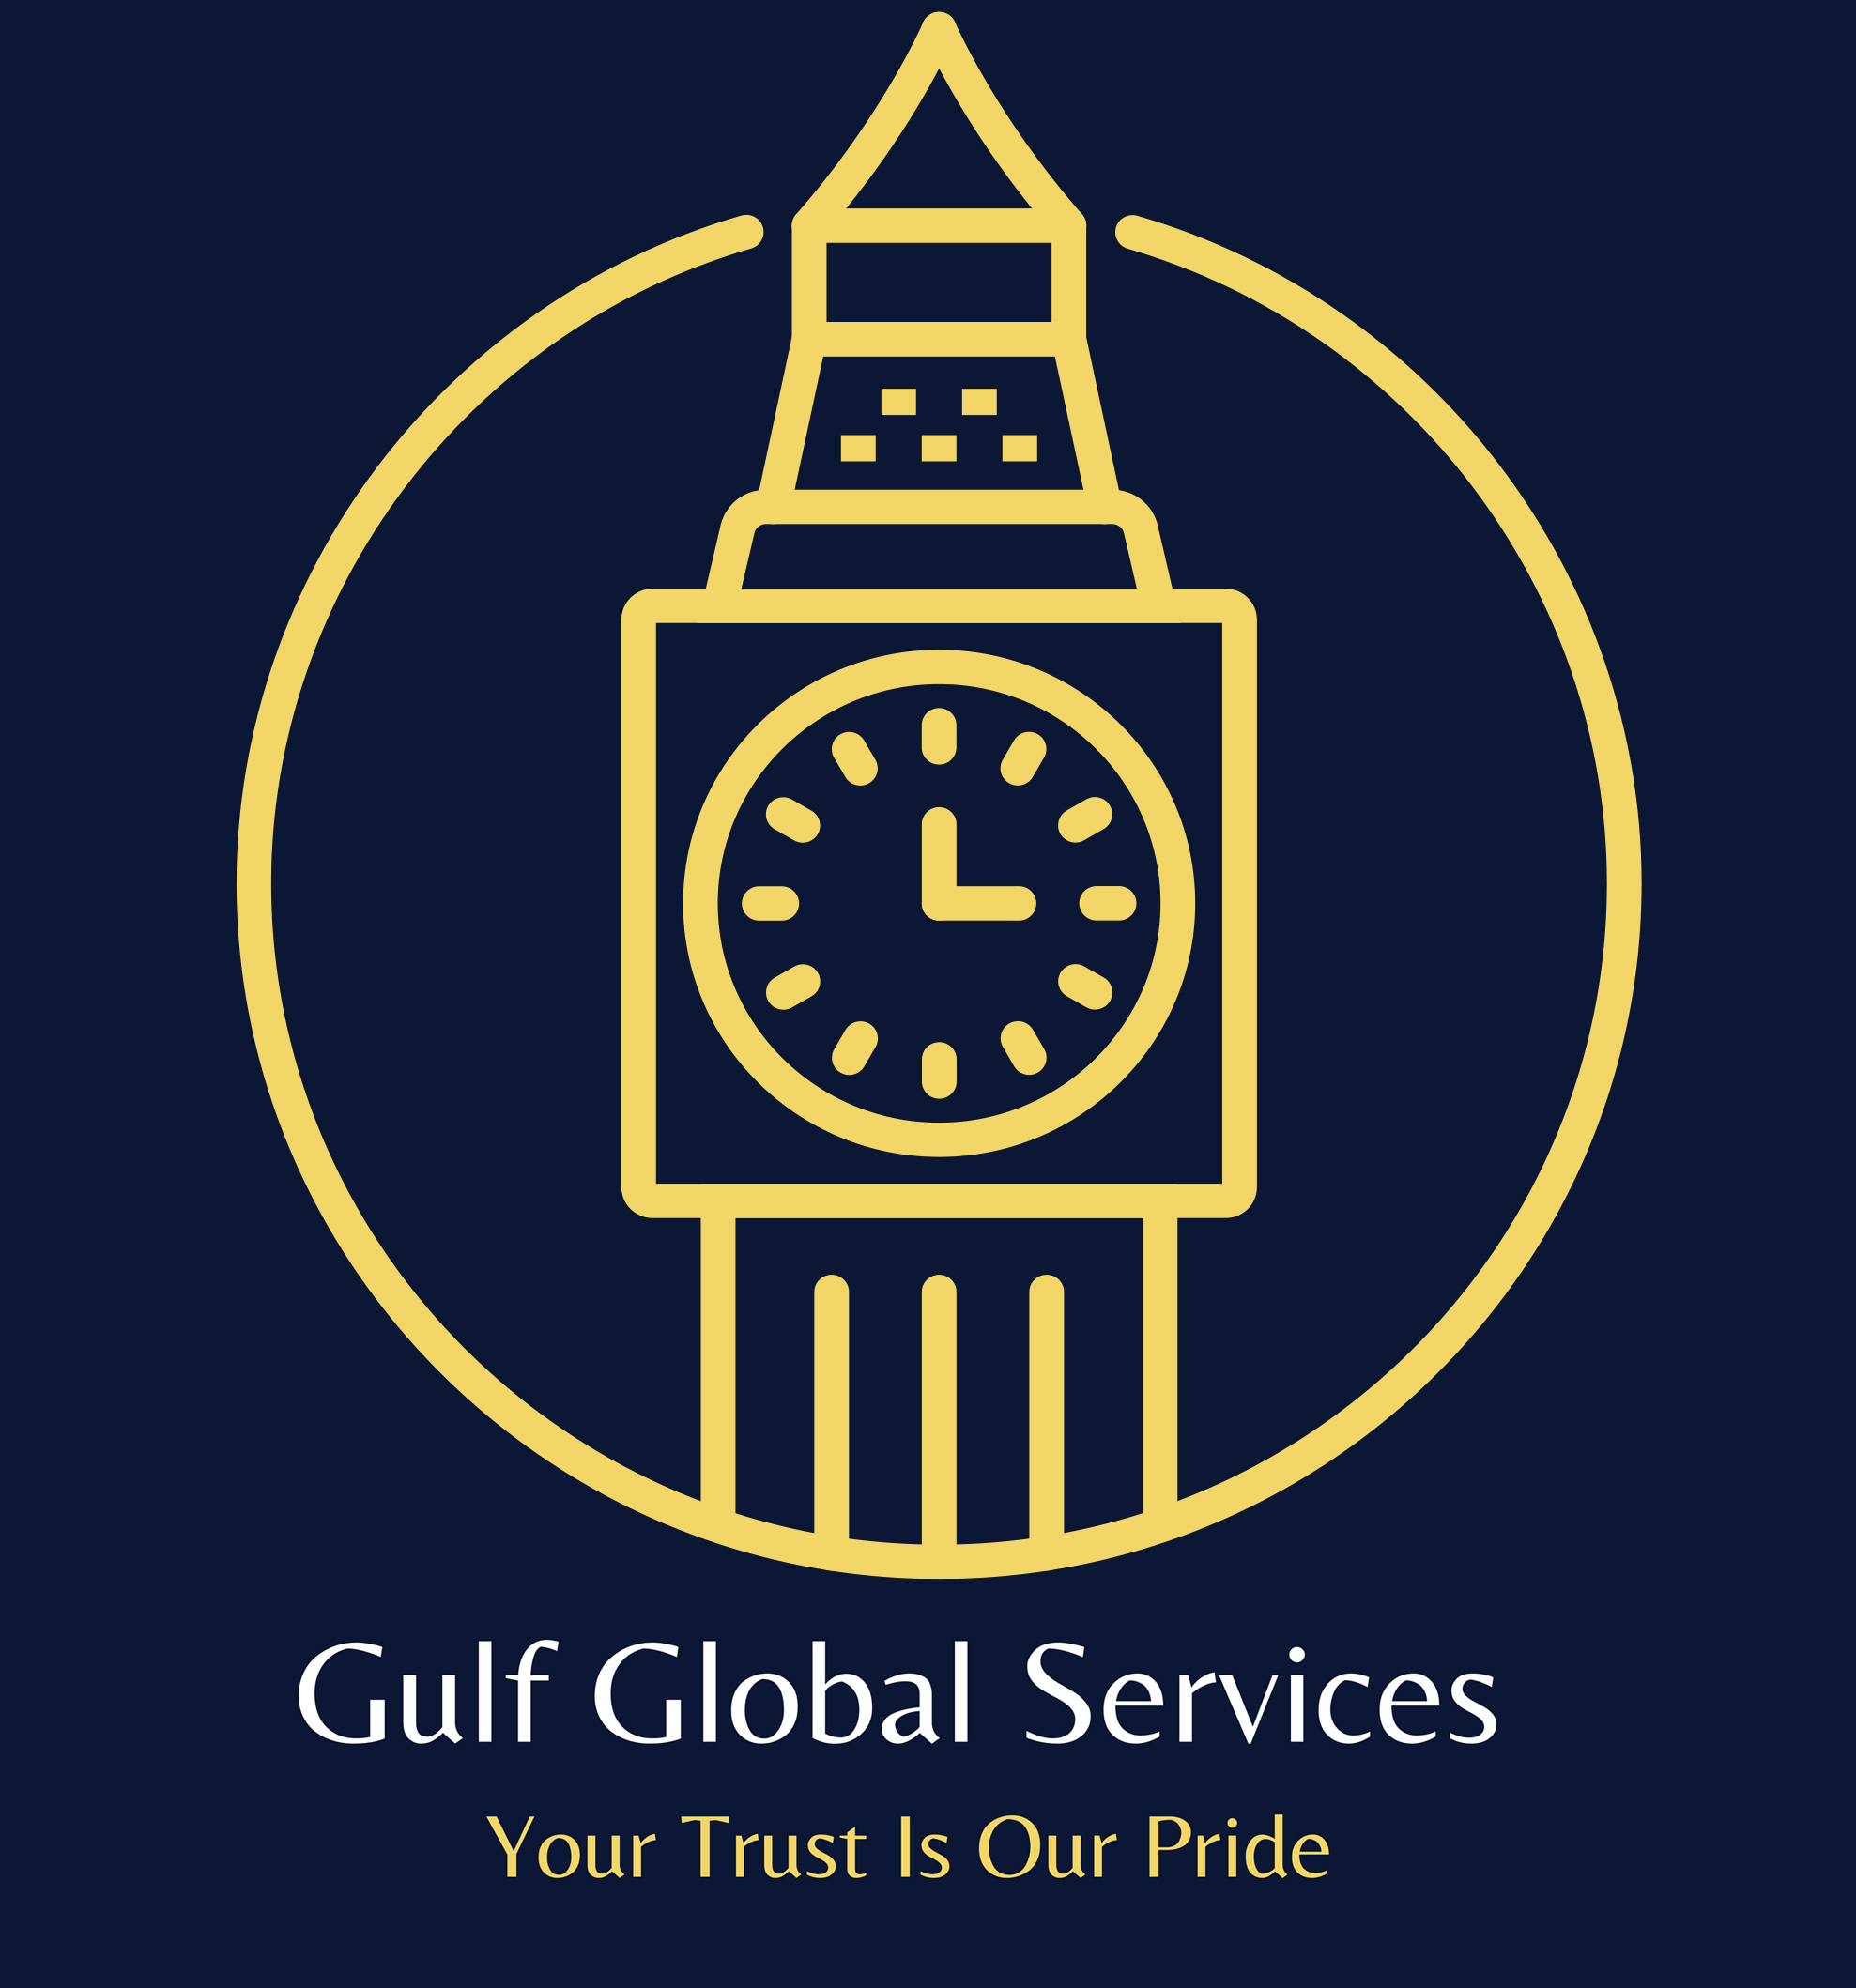 Gulf Global Services